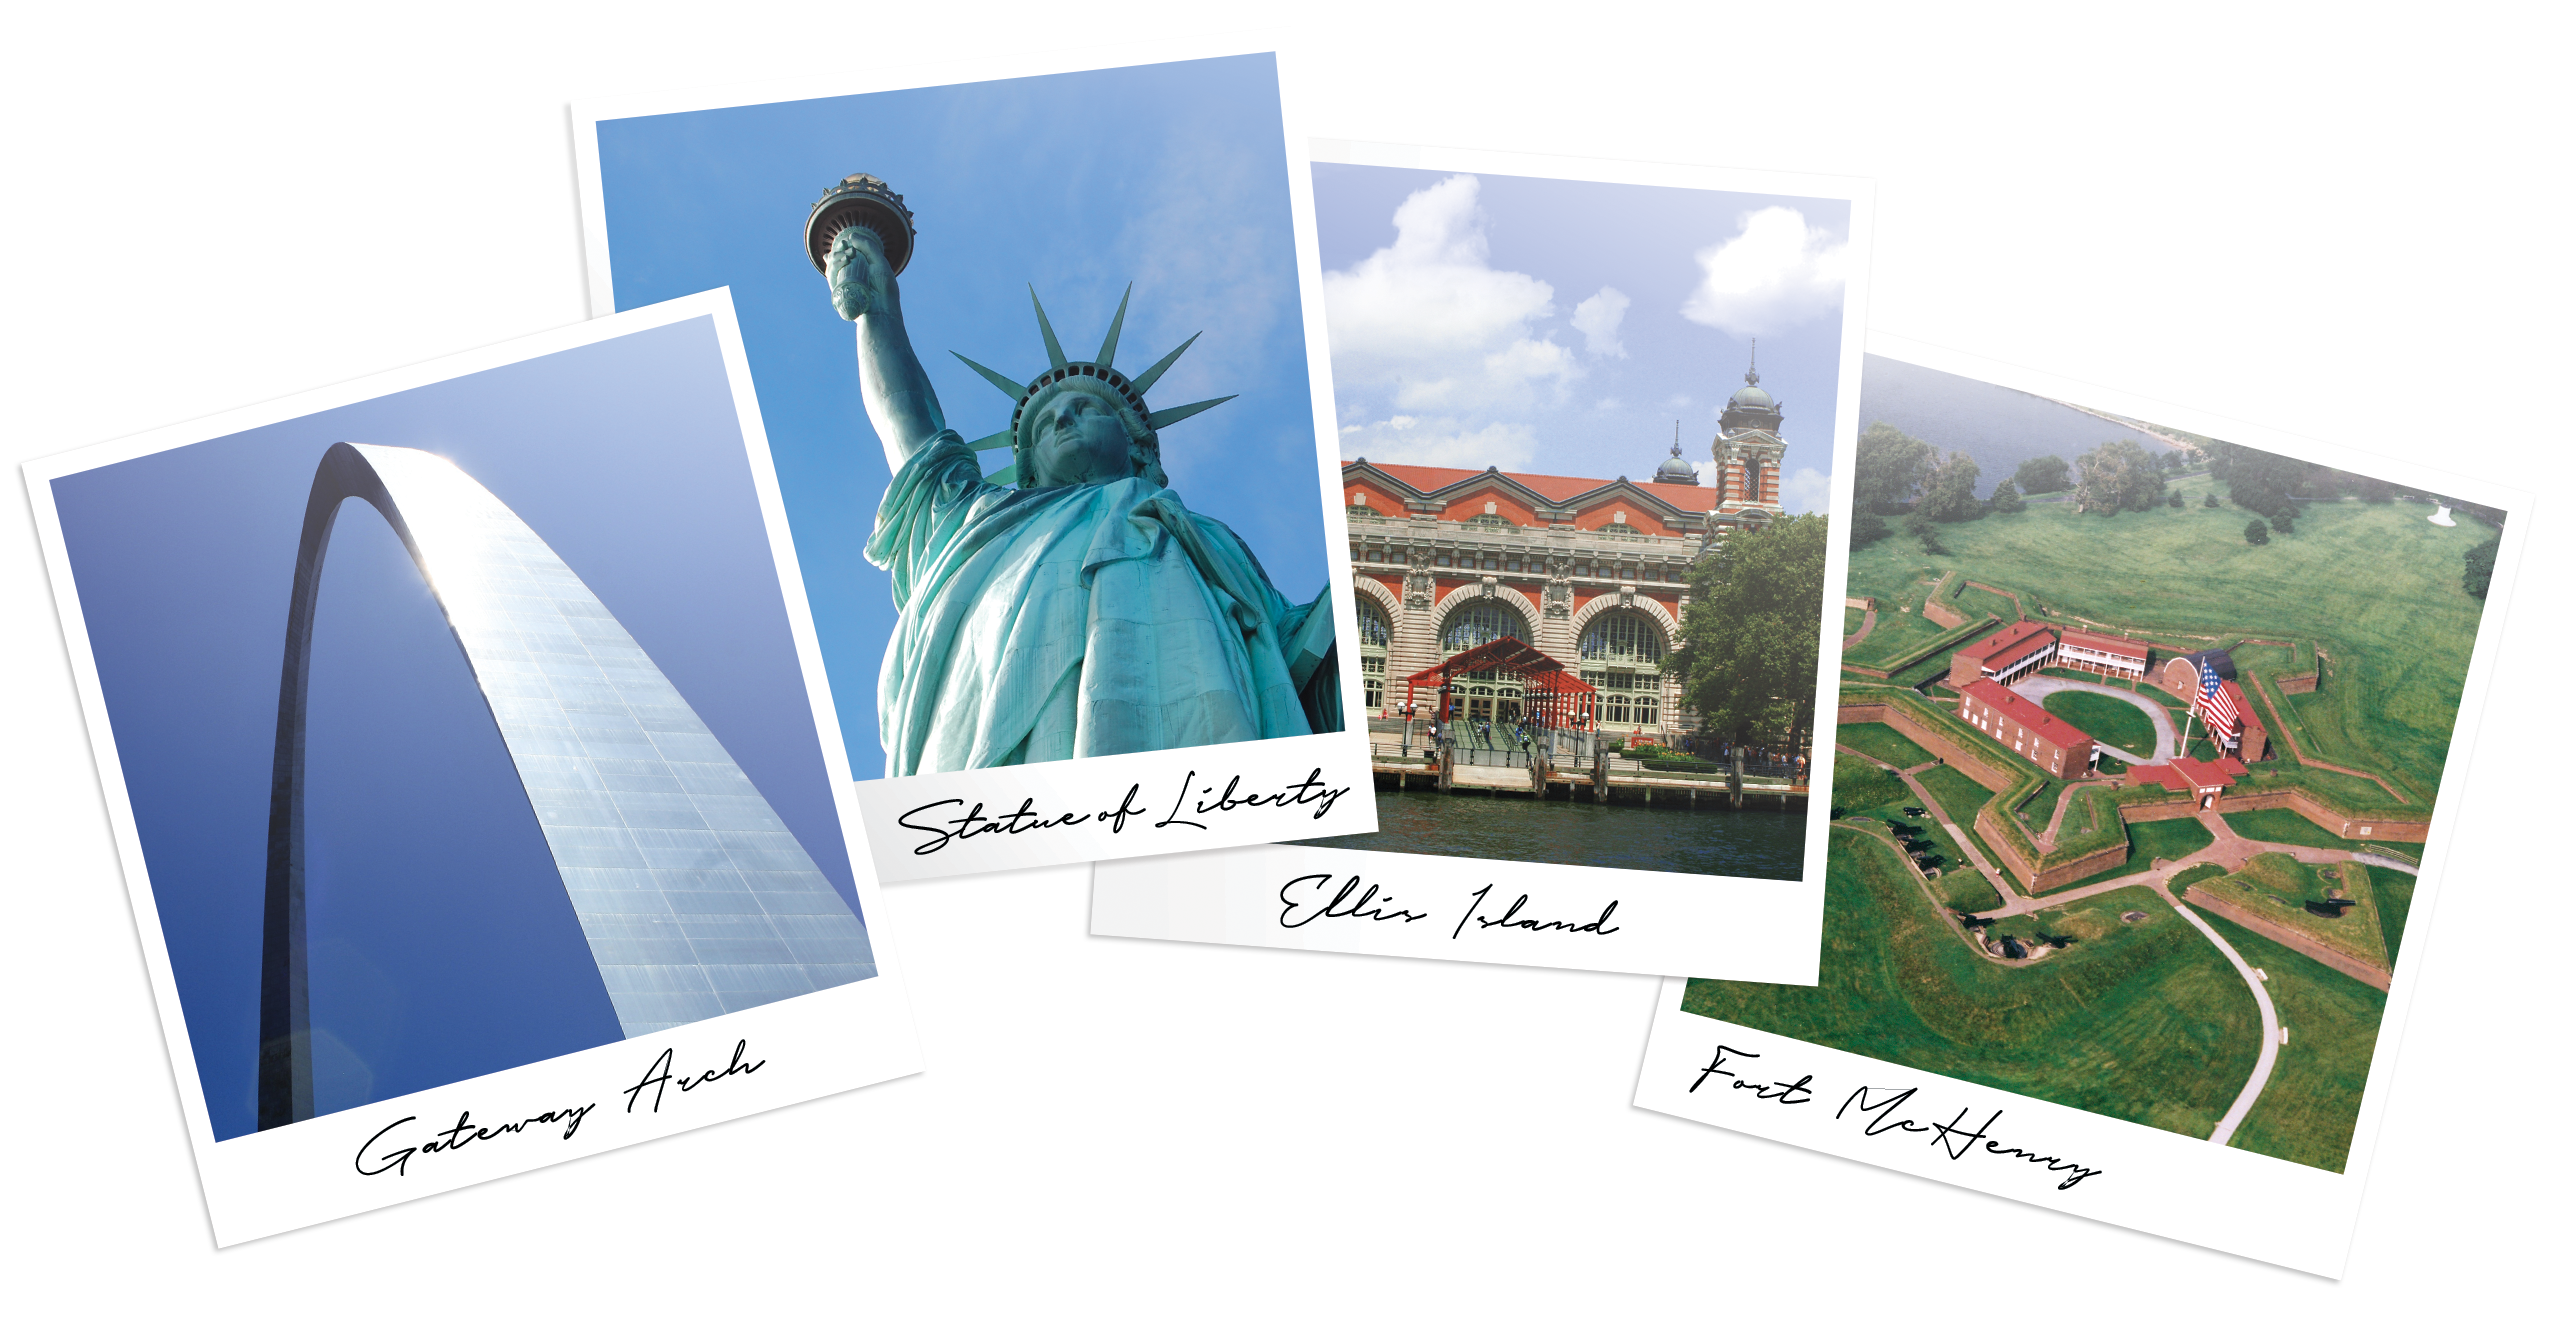 Evelyn Hill Inc. Locations: The Gateway Arch in St. Louis, The Statue of Liberty and Ellis Island in New York, Fort McHenry in Baltimore.